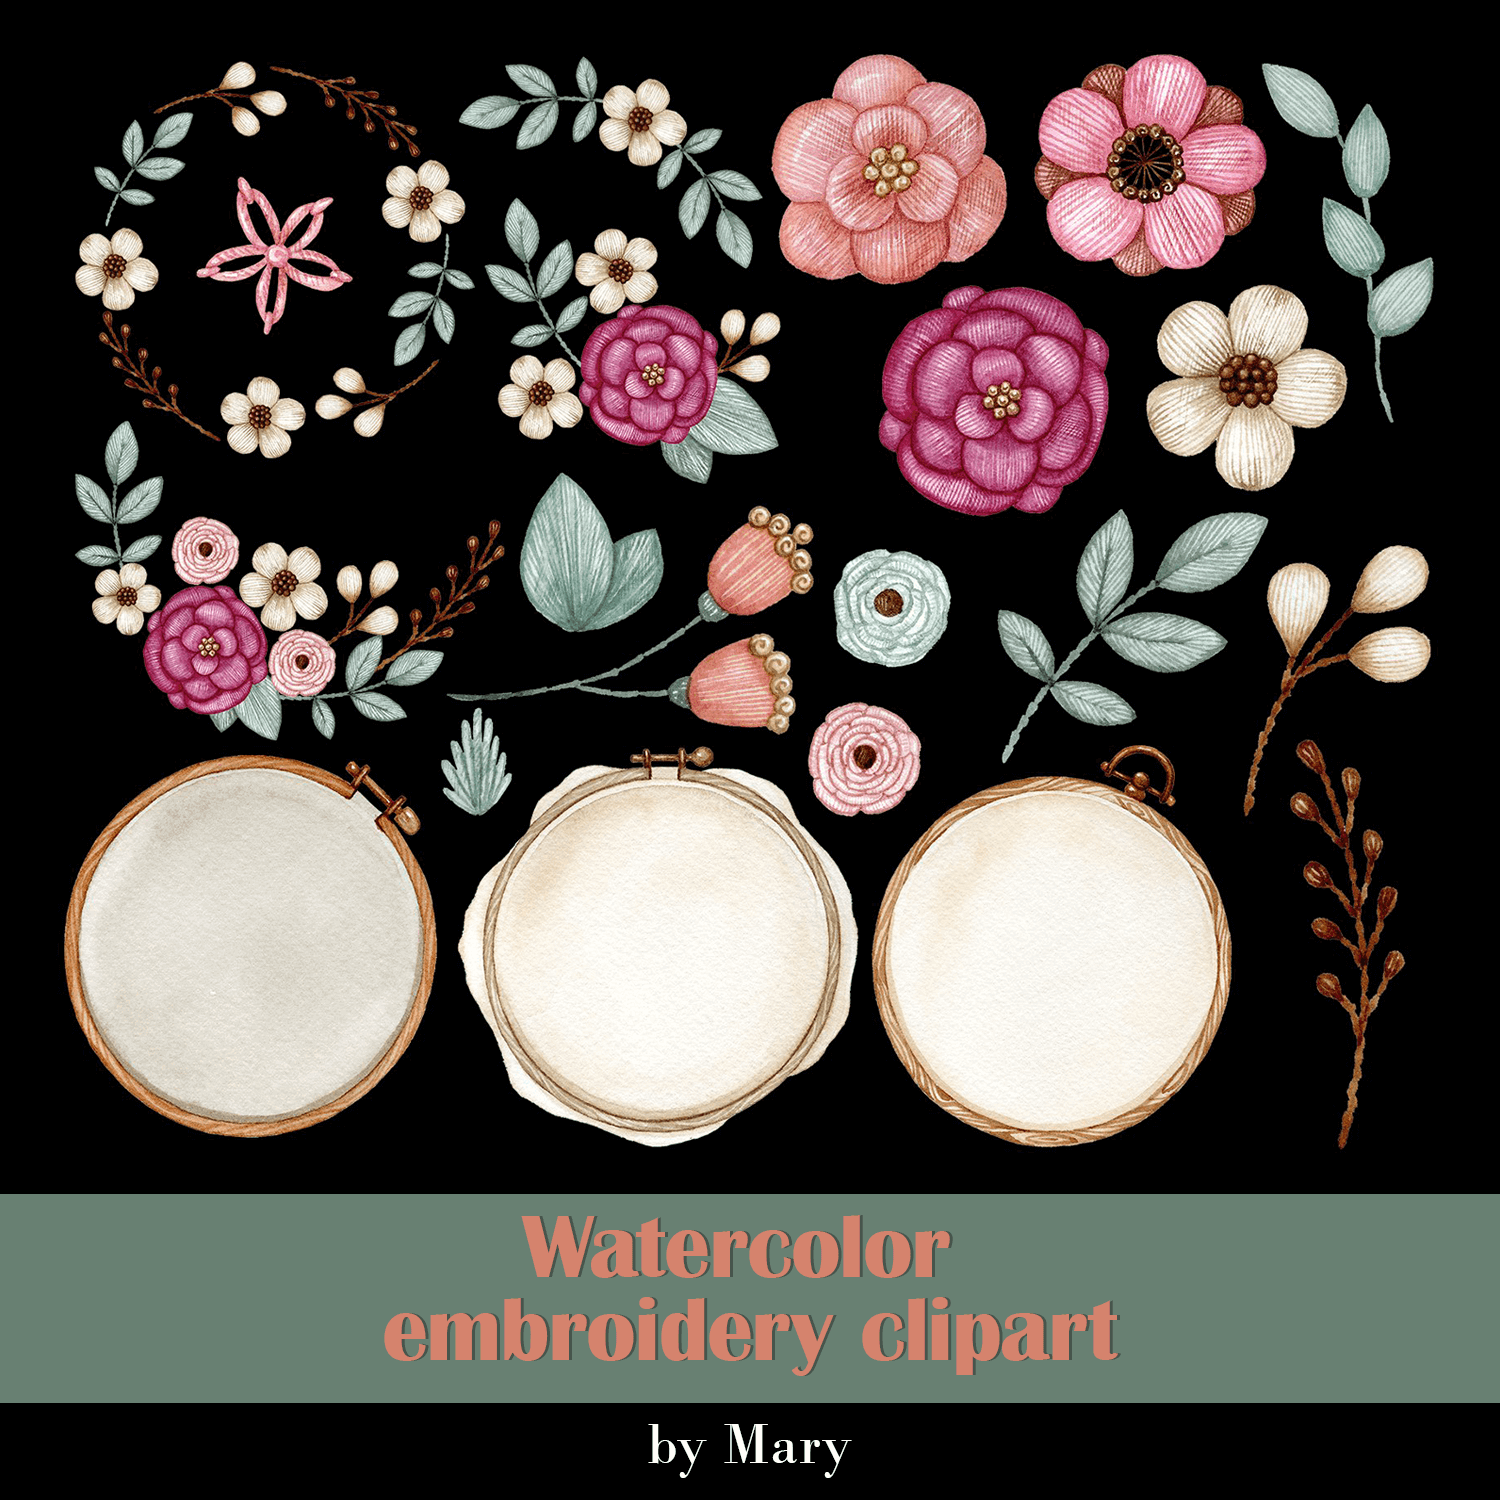 Watercolor Embroidery Clipart on Black Background by Mary.